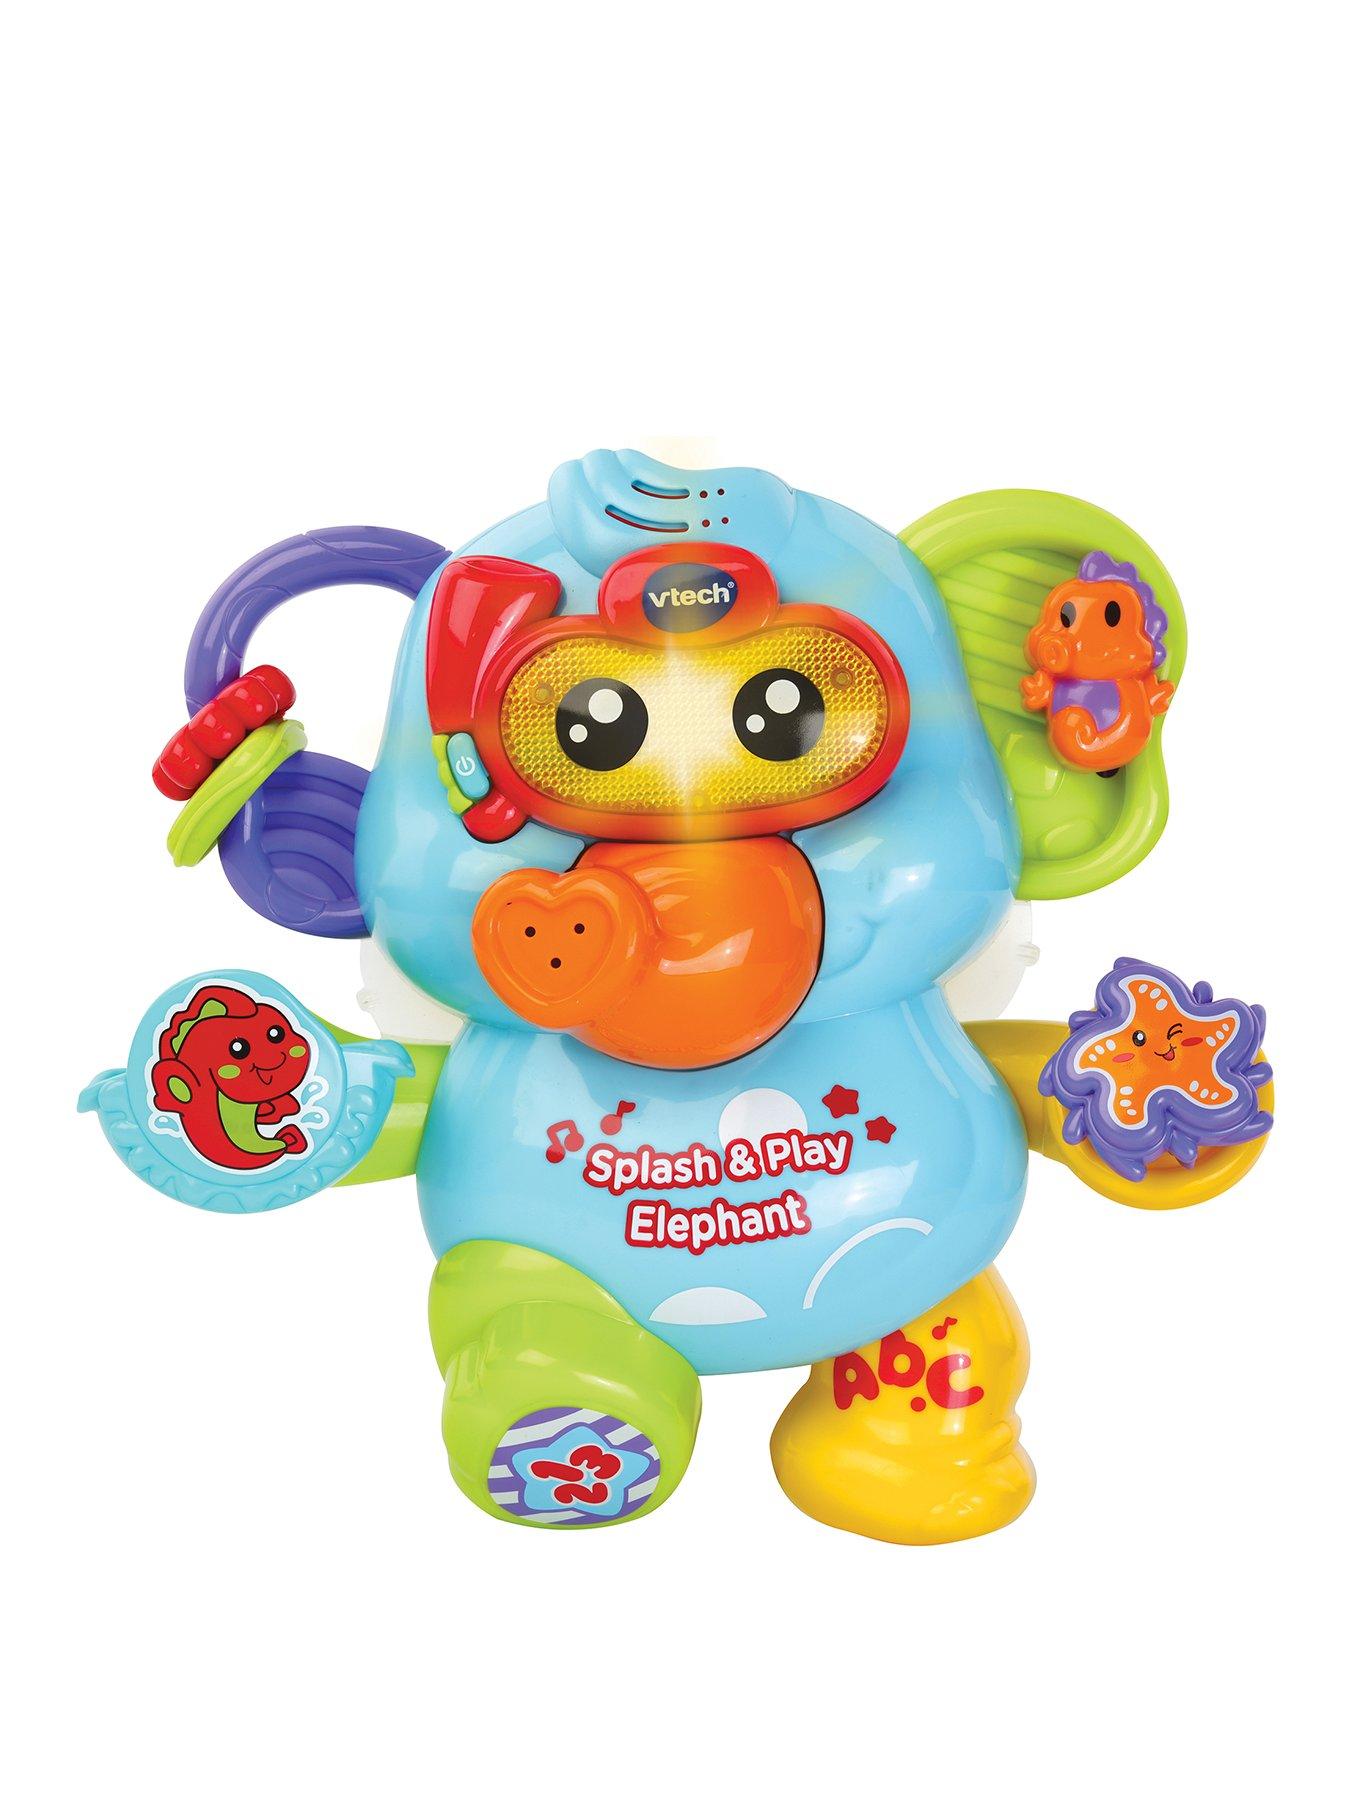 vtech read with me monkey